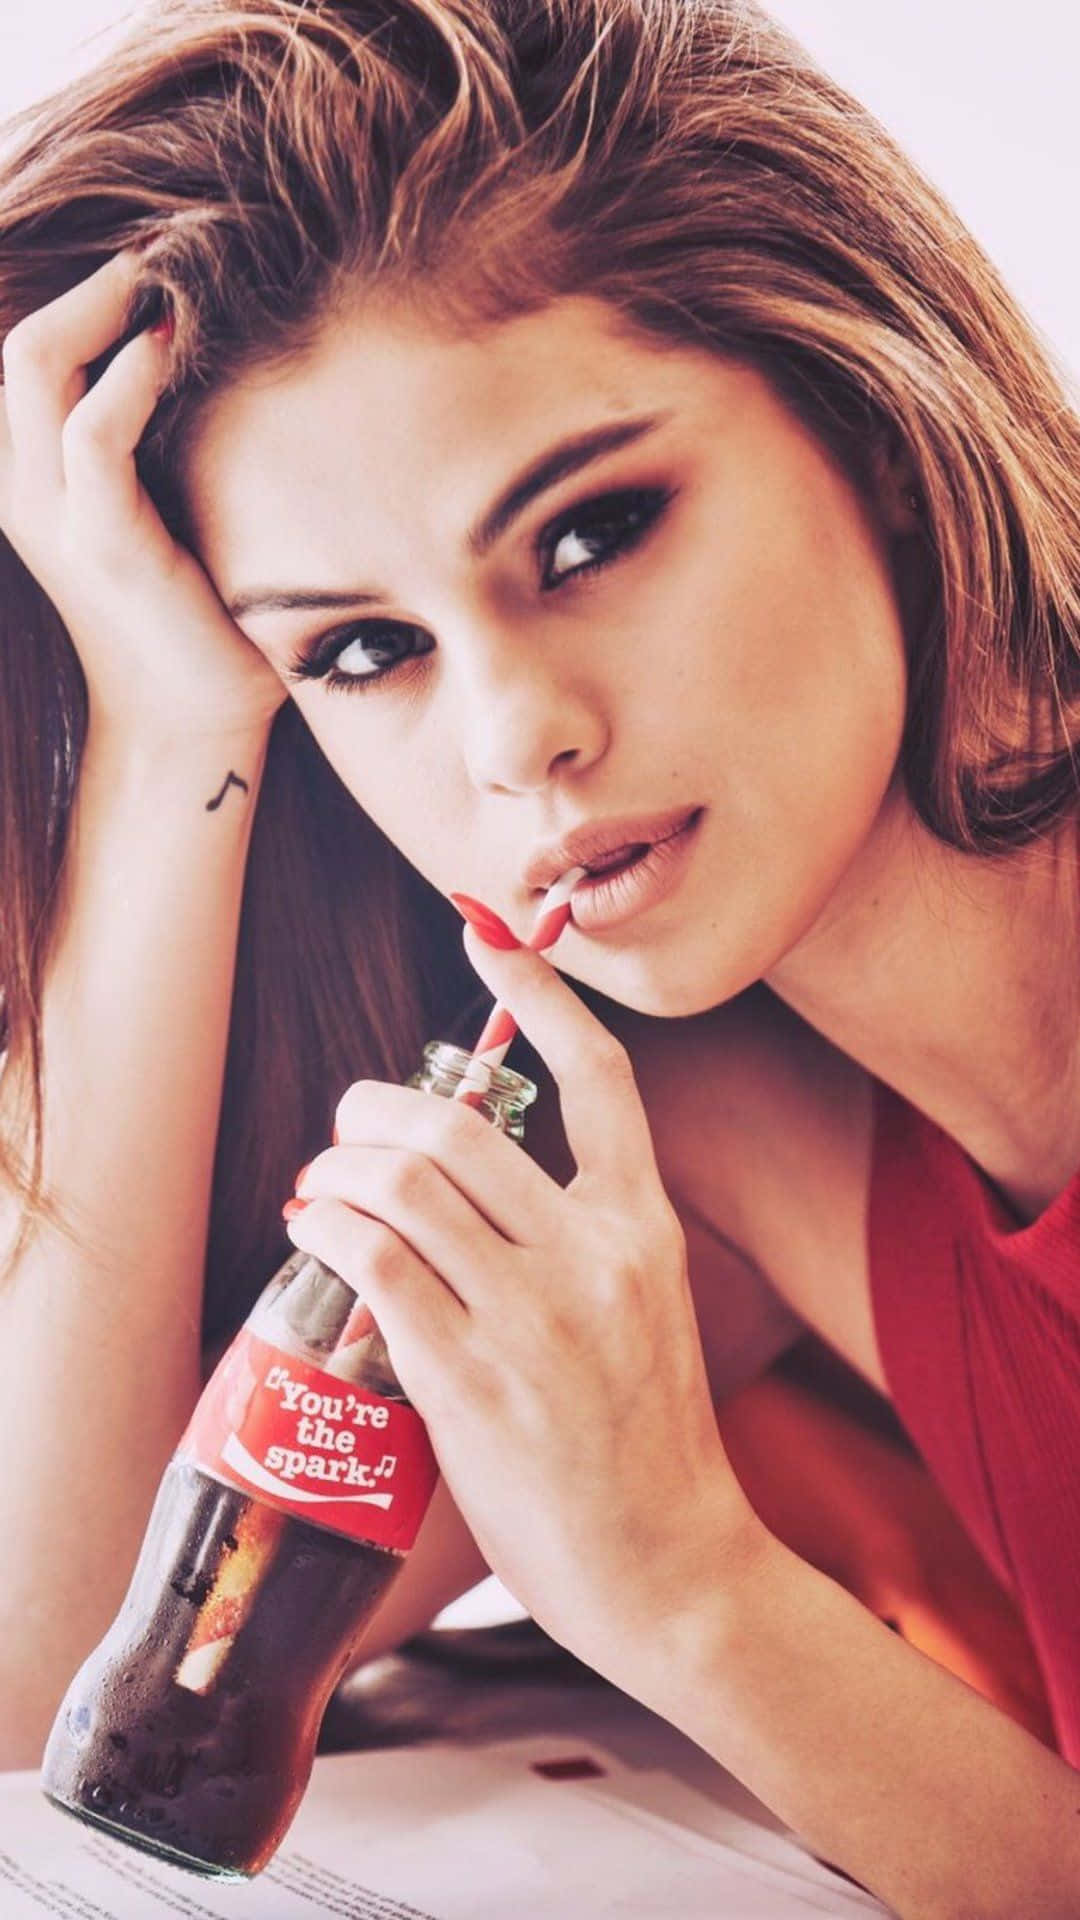 "The latest must-have accessory - Selena Gomez Iphone." Wallpaper